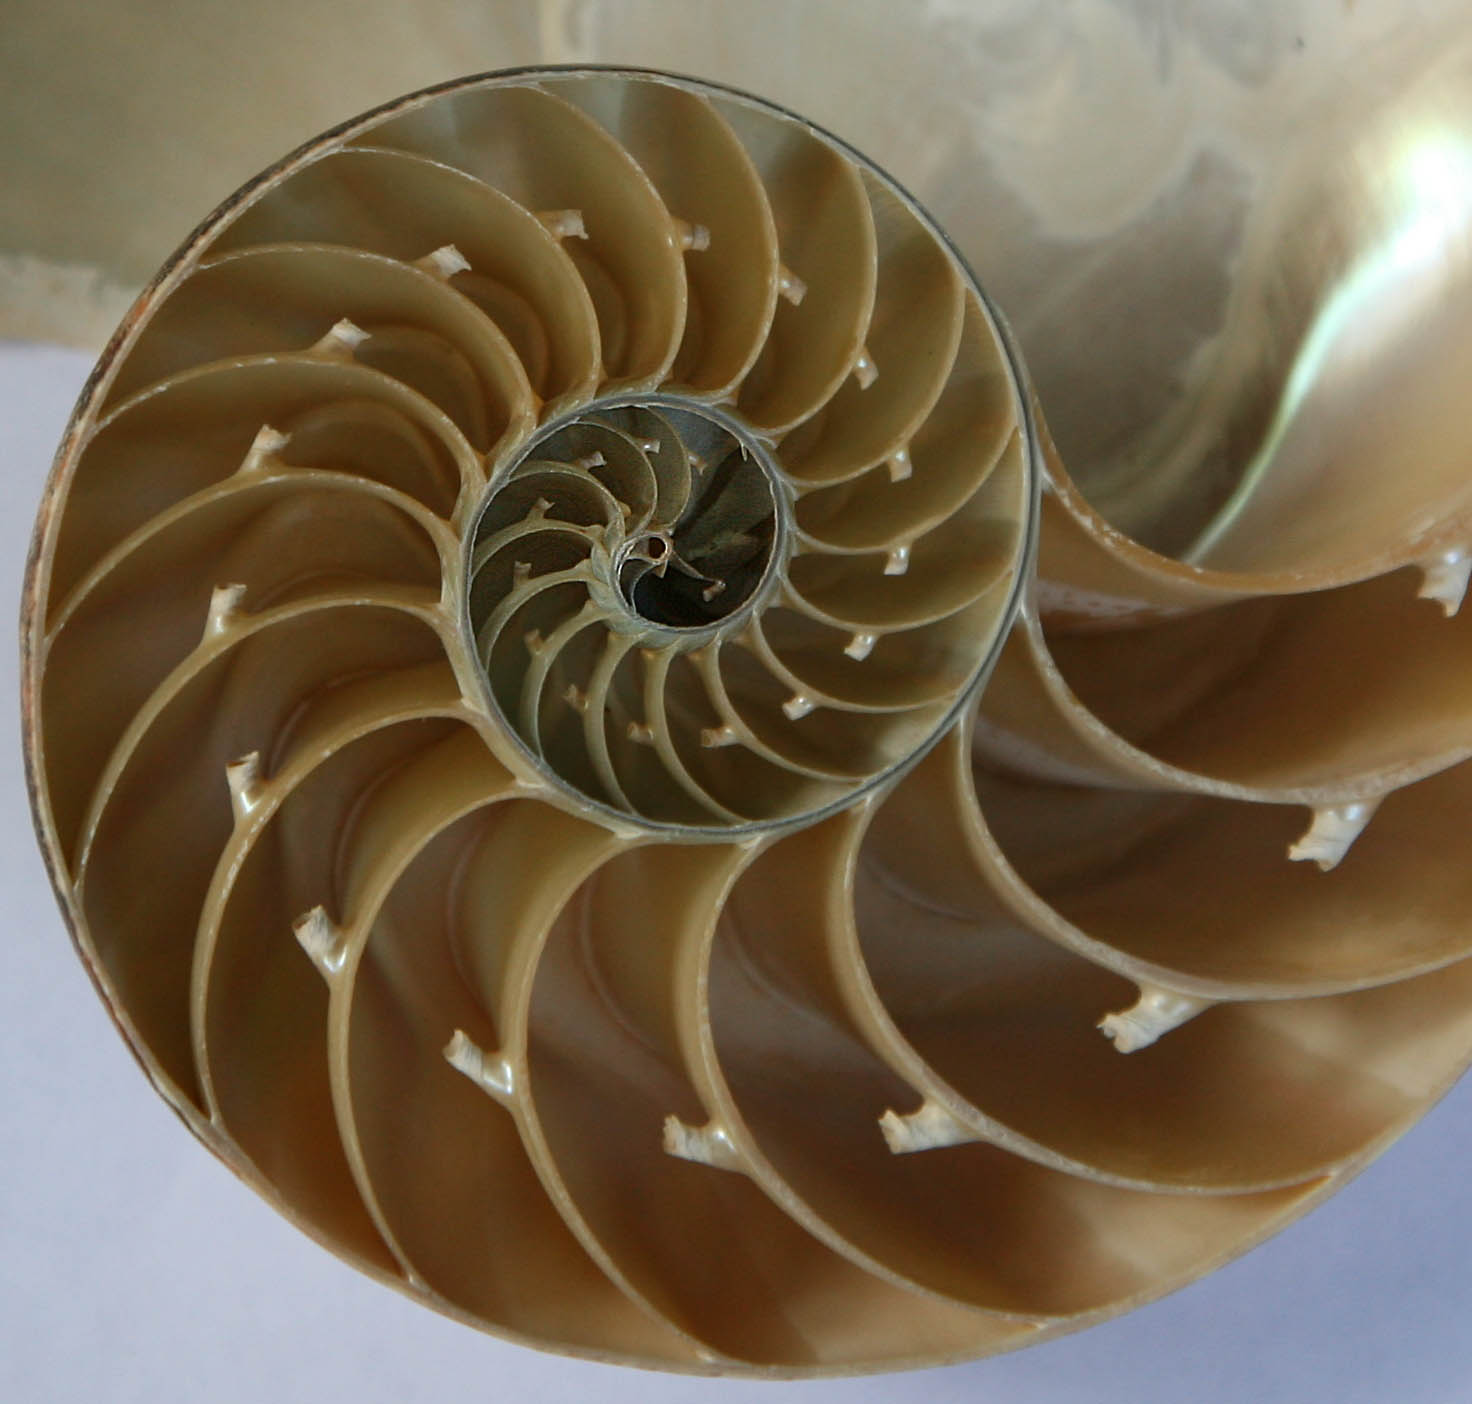 Golden ratio expressed in a seashell